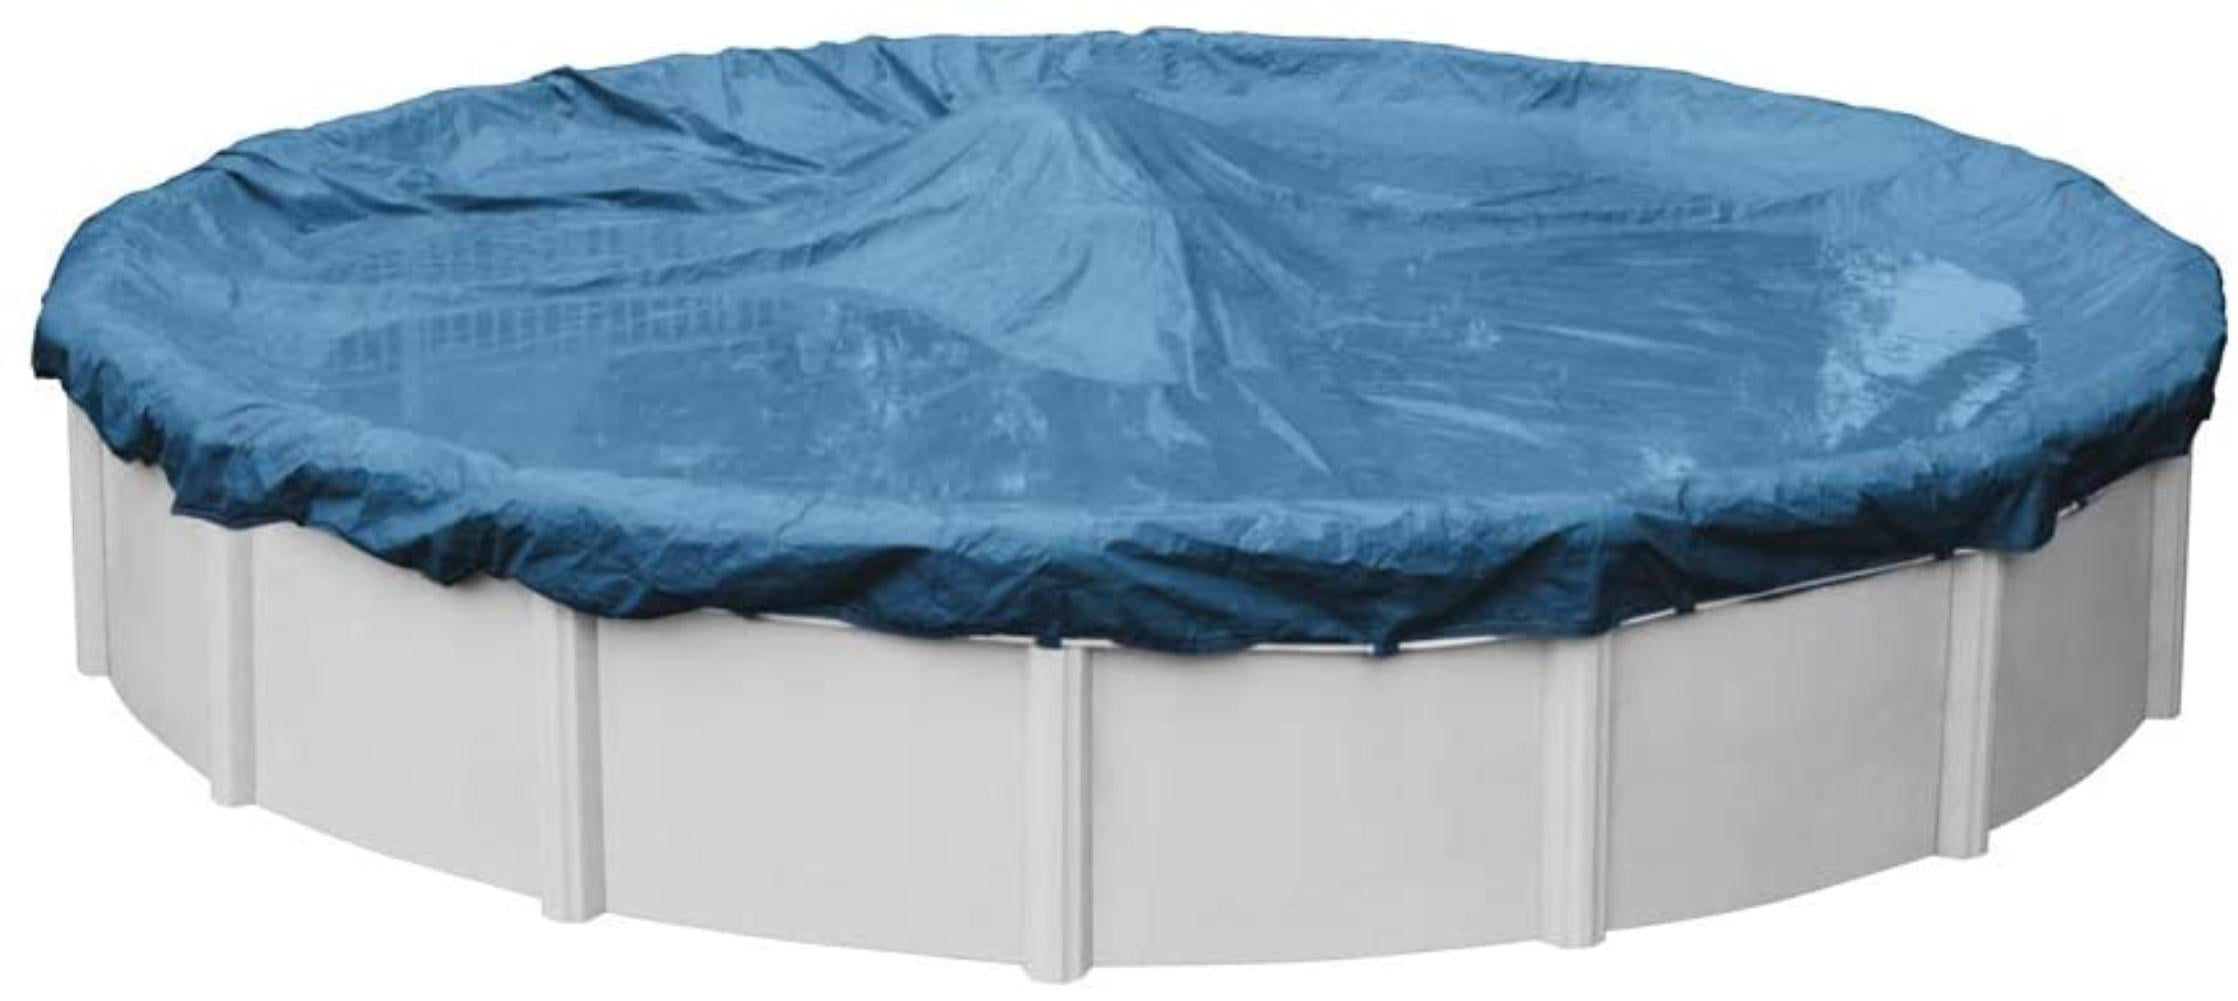 Robelle 35244 Winter Round AboveGround Pool Cover, 24ft, 01 Super, Winter pool cover to be